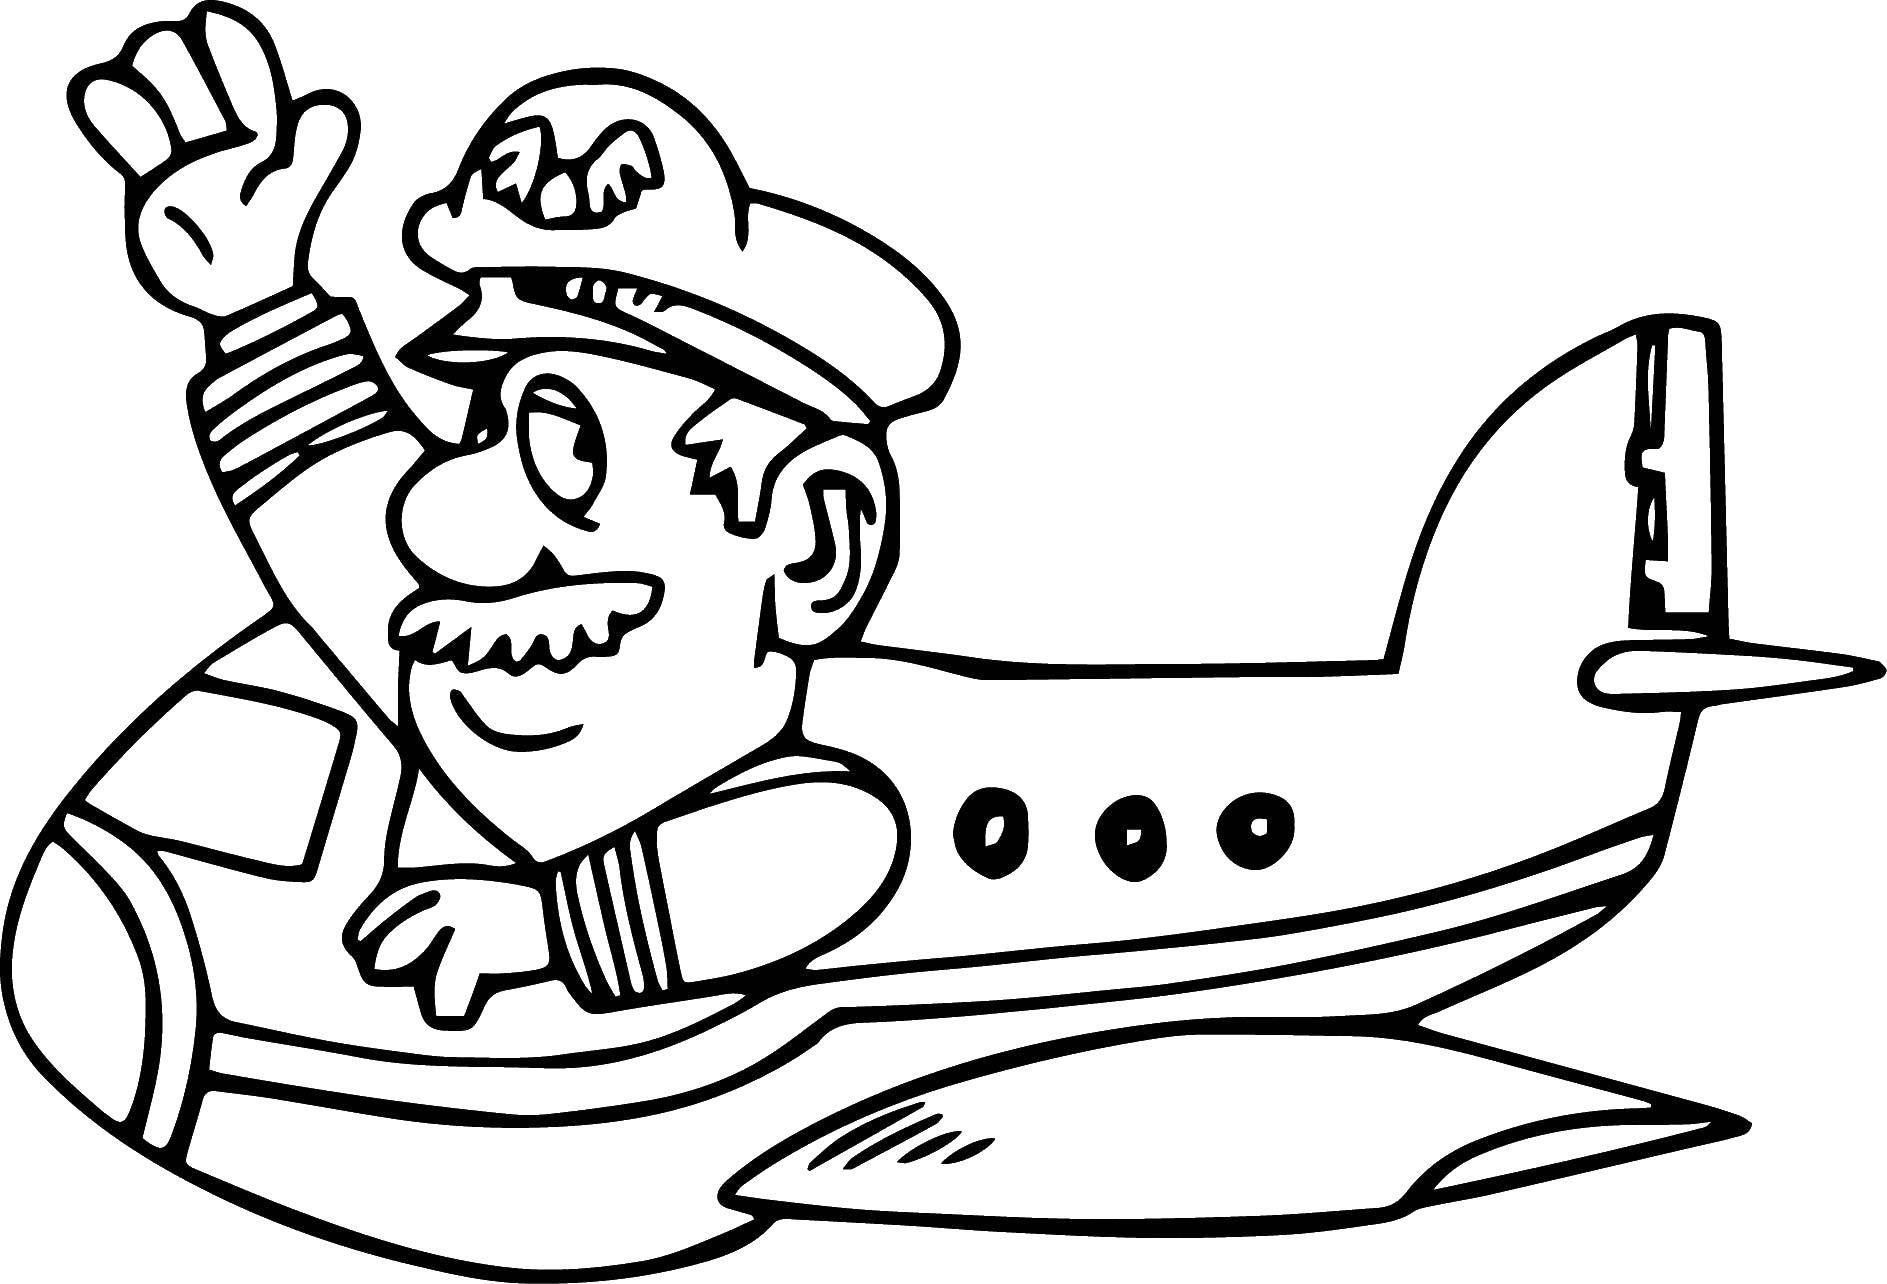 Coloring The pilot in the plane. Category The planes. Tags:  Plane.